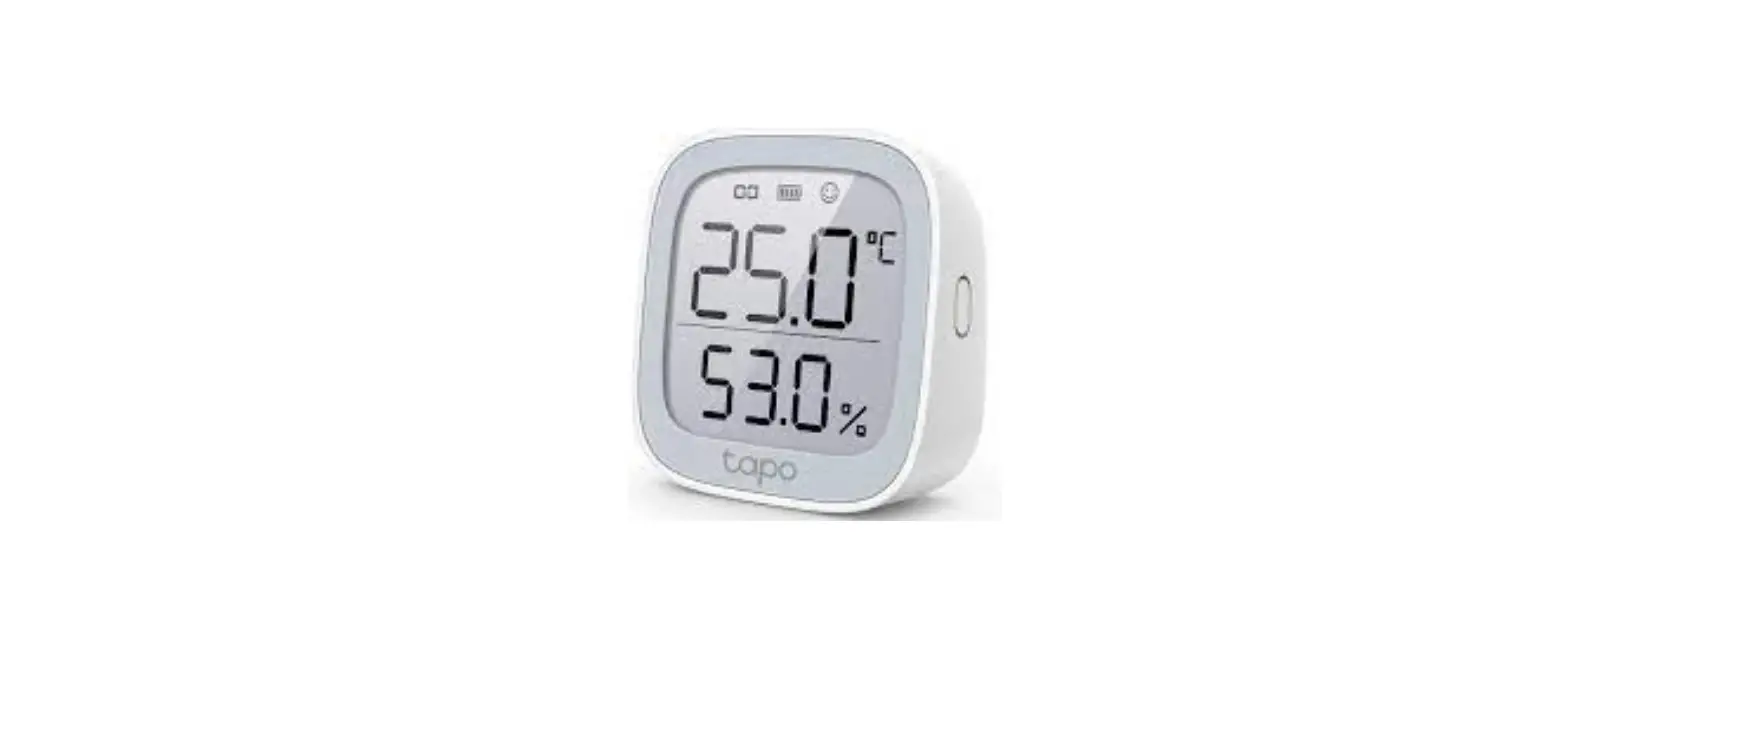 tp-link tapo Smart Temperature and Humidity Monitor